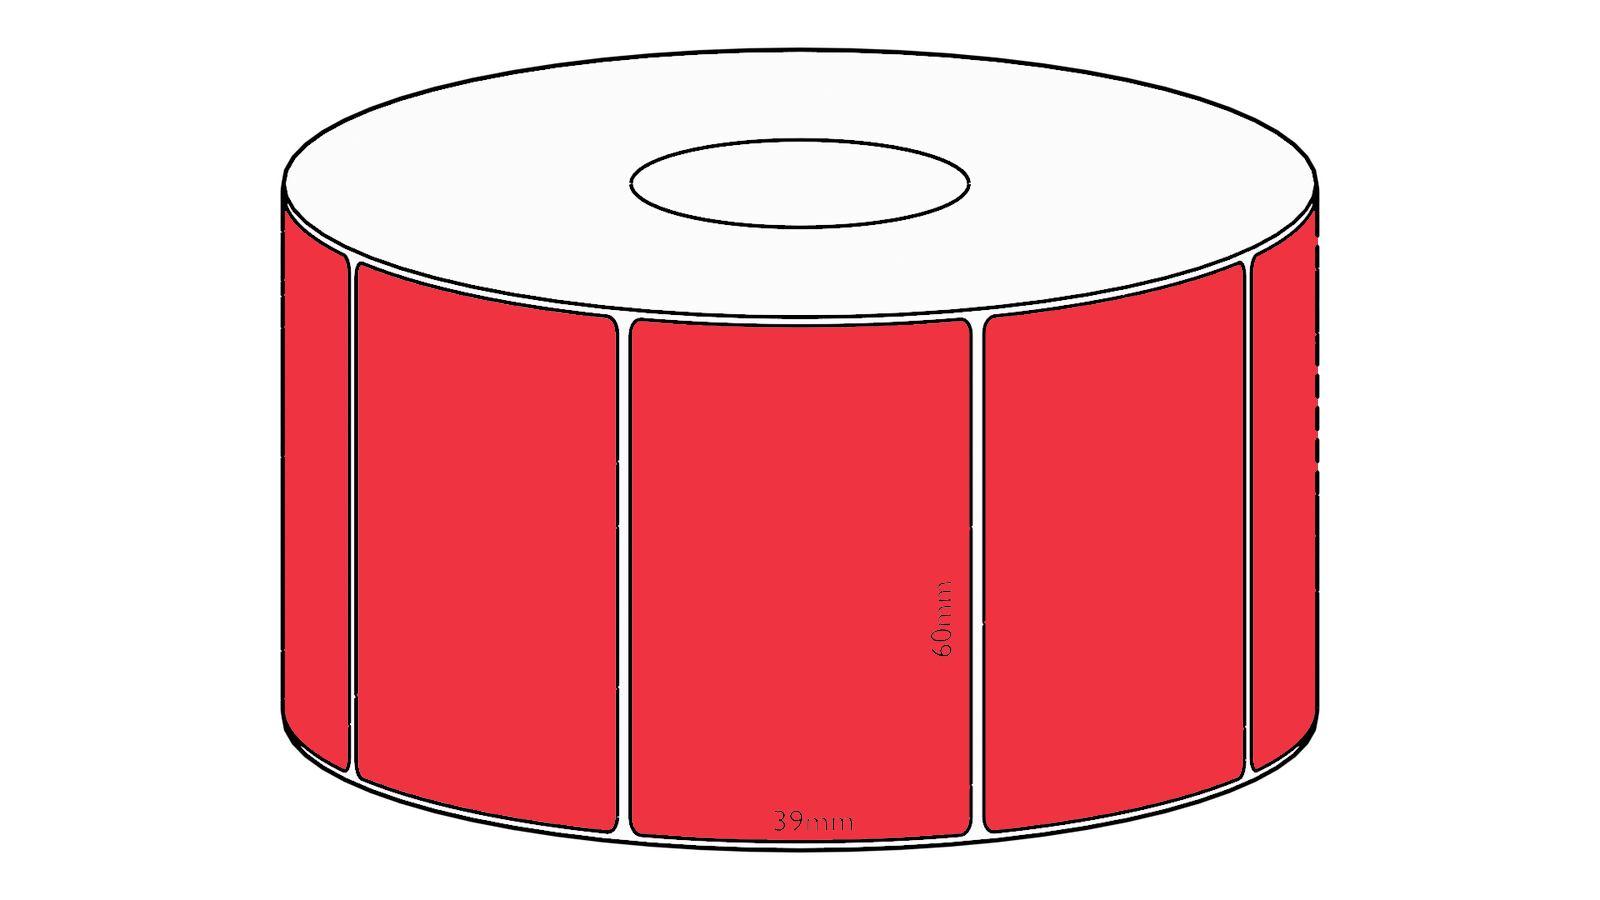 60x39mm Red Direct Thermal Permanent Label, 1200 per roll, 38mm core